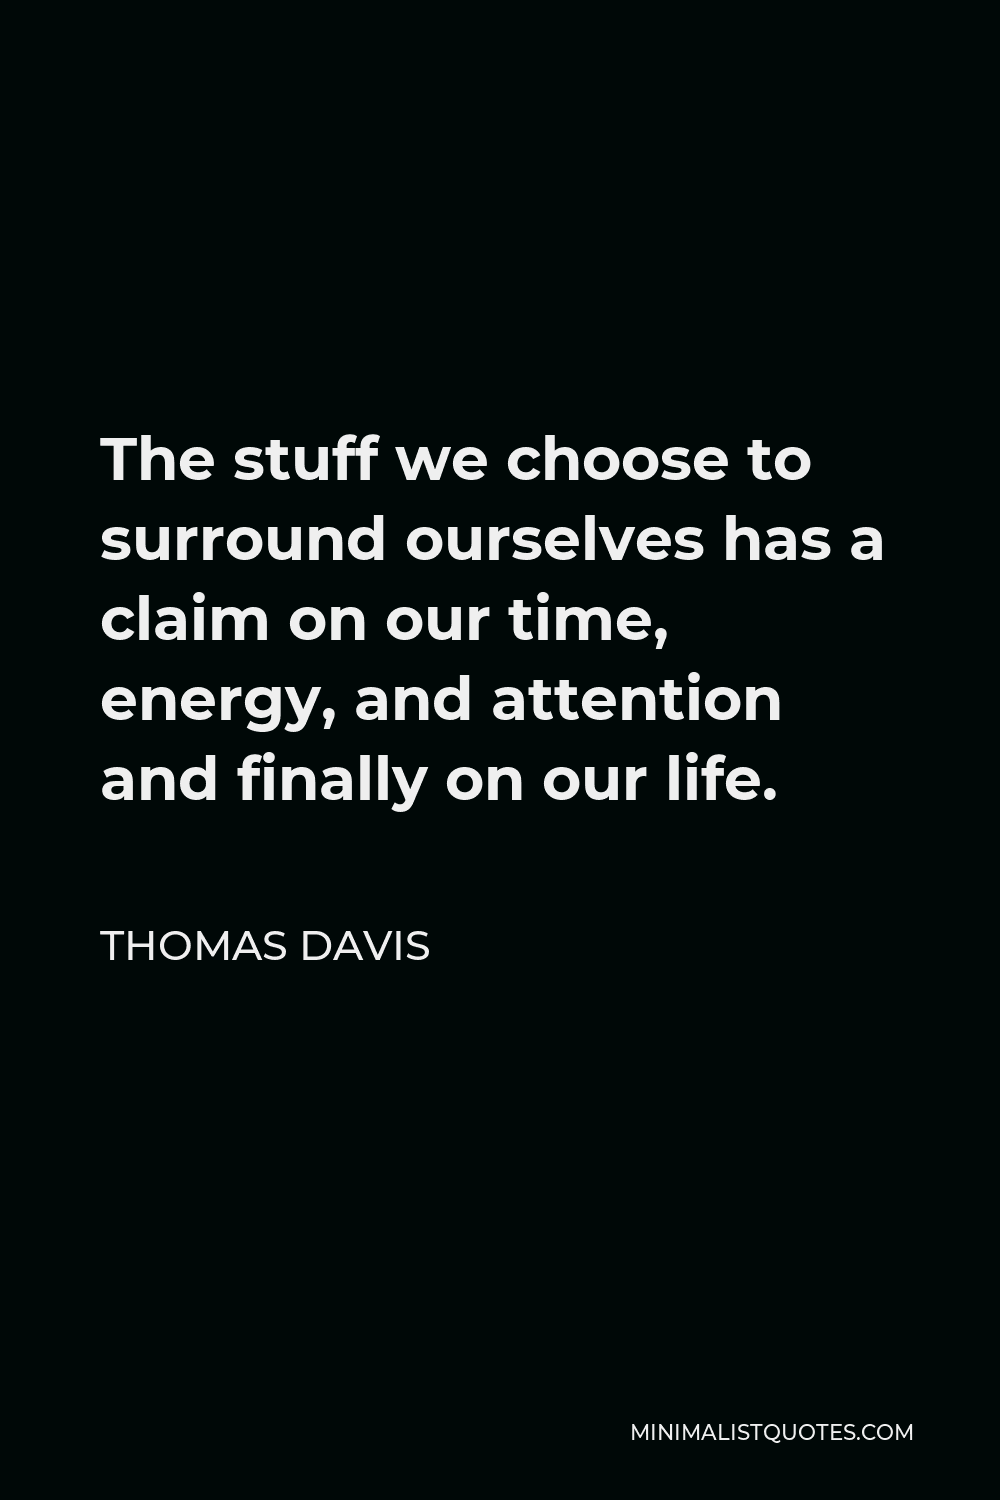 Thomas Davis Quote - The stuff we choose to surround ourselves has a claim on our time, energy, and attention and finally on our life.